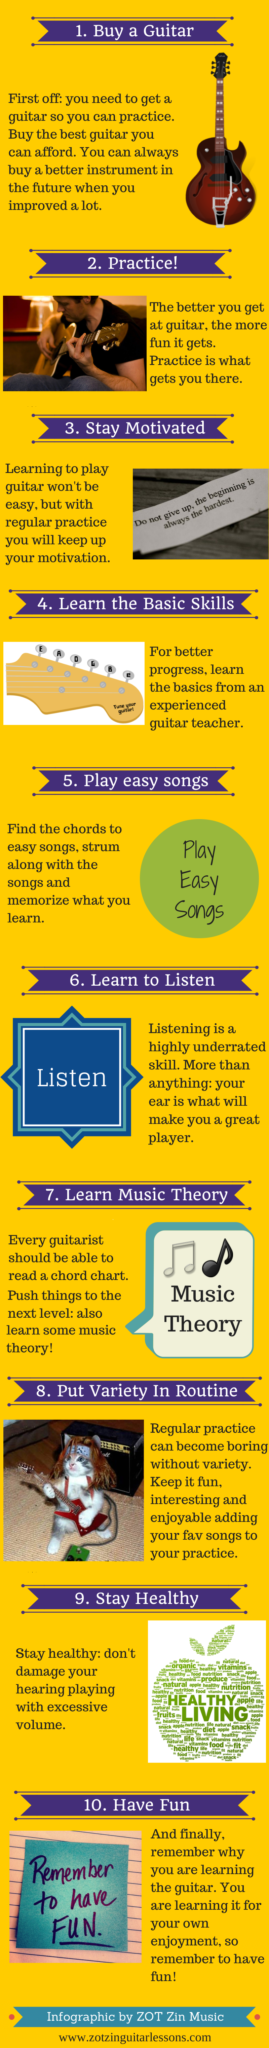 Infographic-10-Principles-for-Learning-Guitar1